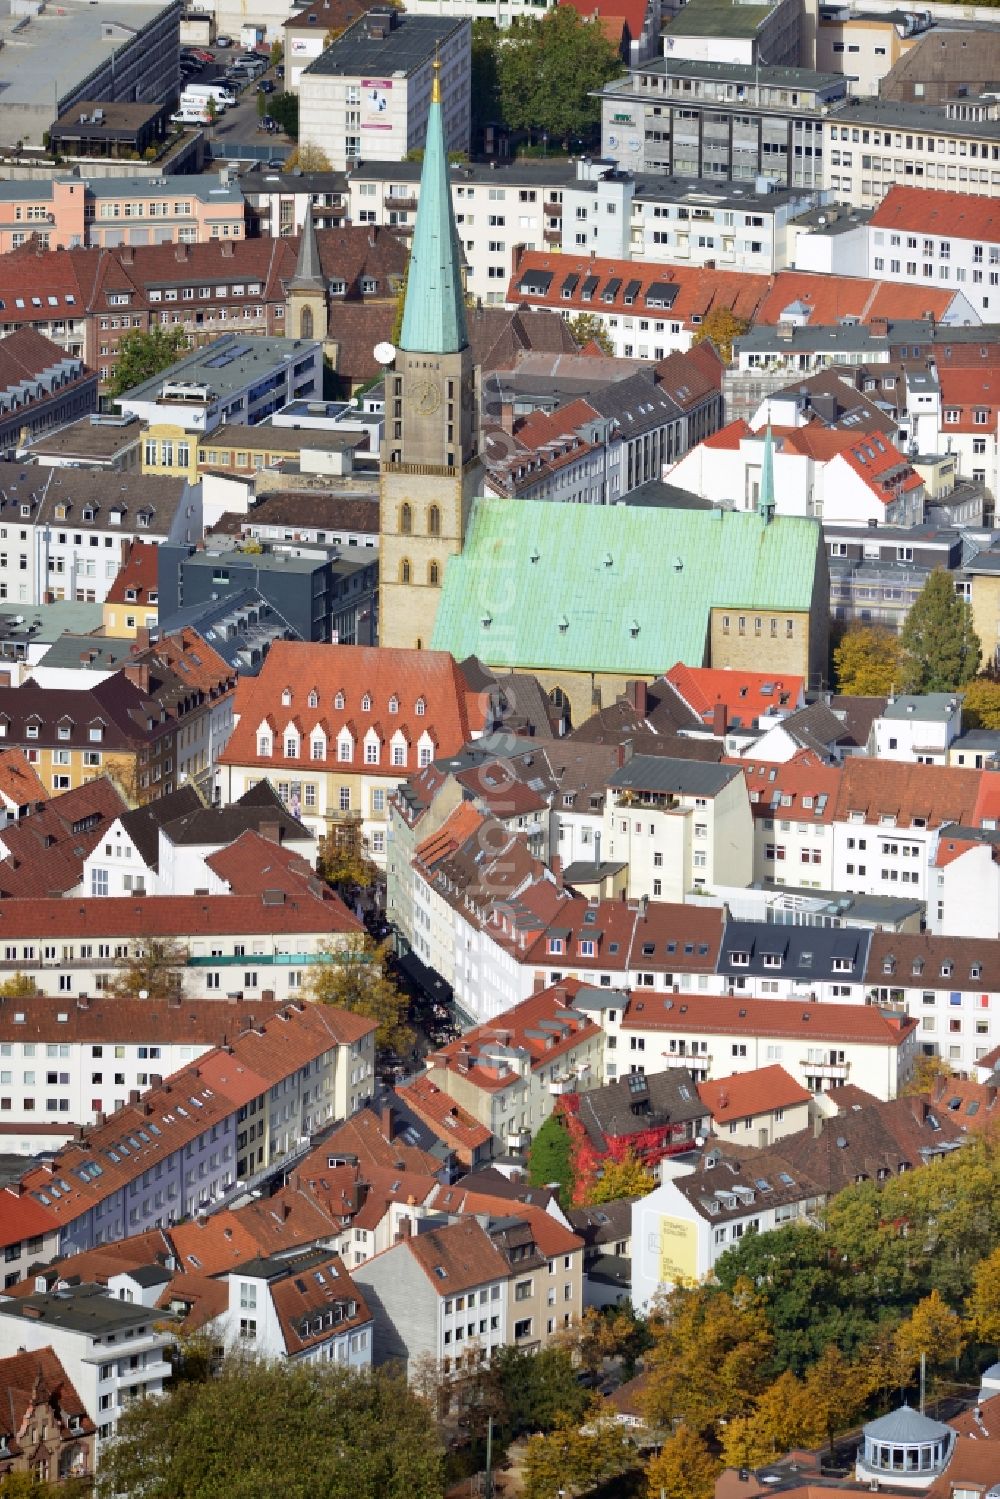 Bielefeld from the bird's eye view: Cityscape of the old city of Bielefeld in the state North Rhine-Westphalia. In the shot is the Altstädter Nicolaikirchen. The Altstädter Nicolaikirche ist the eldest church in the orinigal township of Bielefeld